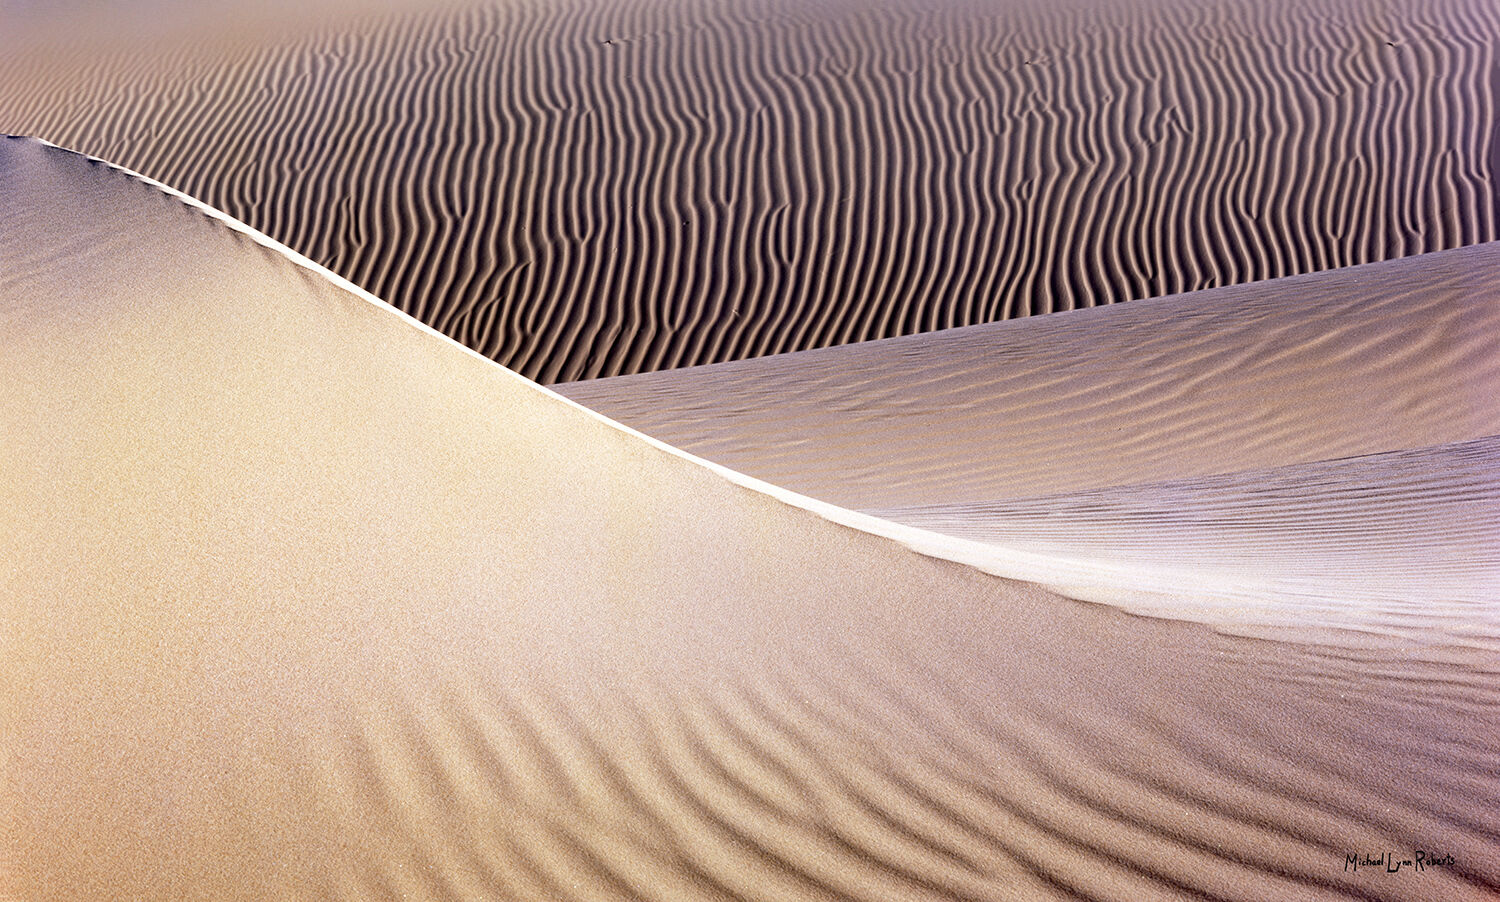 An abstract image of sand dunes showing the interplay of textures, light, and shadows.